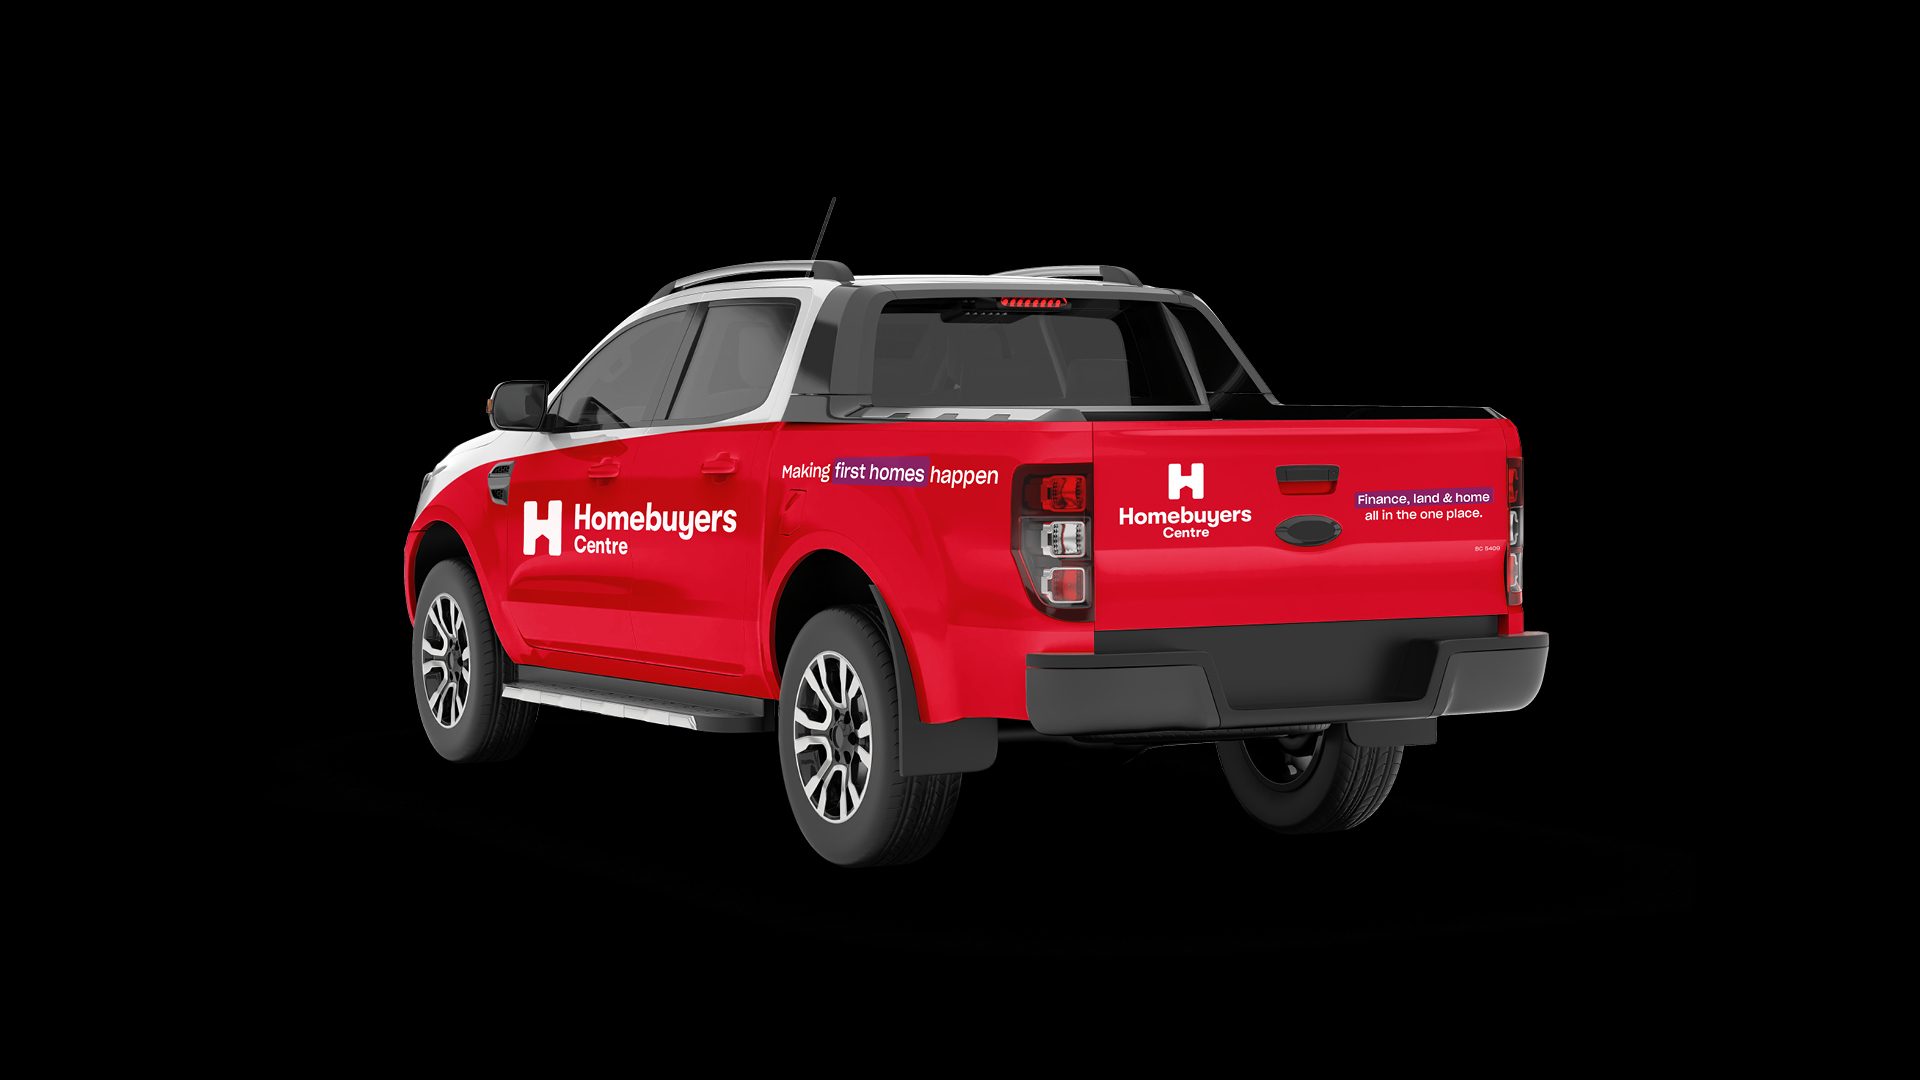 Homebuyers Centre branded vehicle